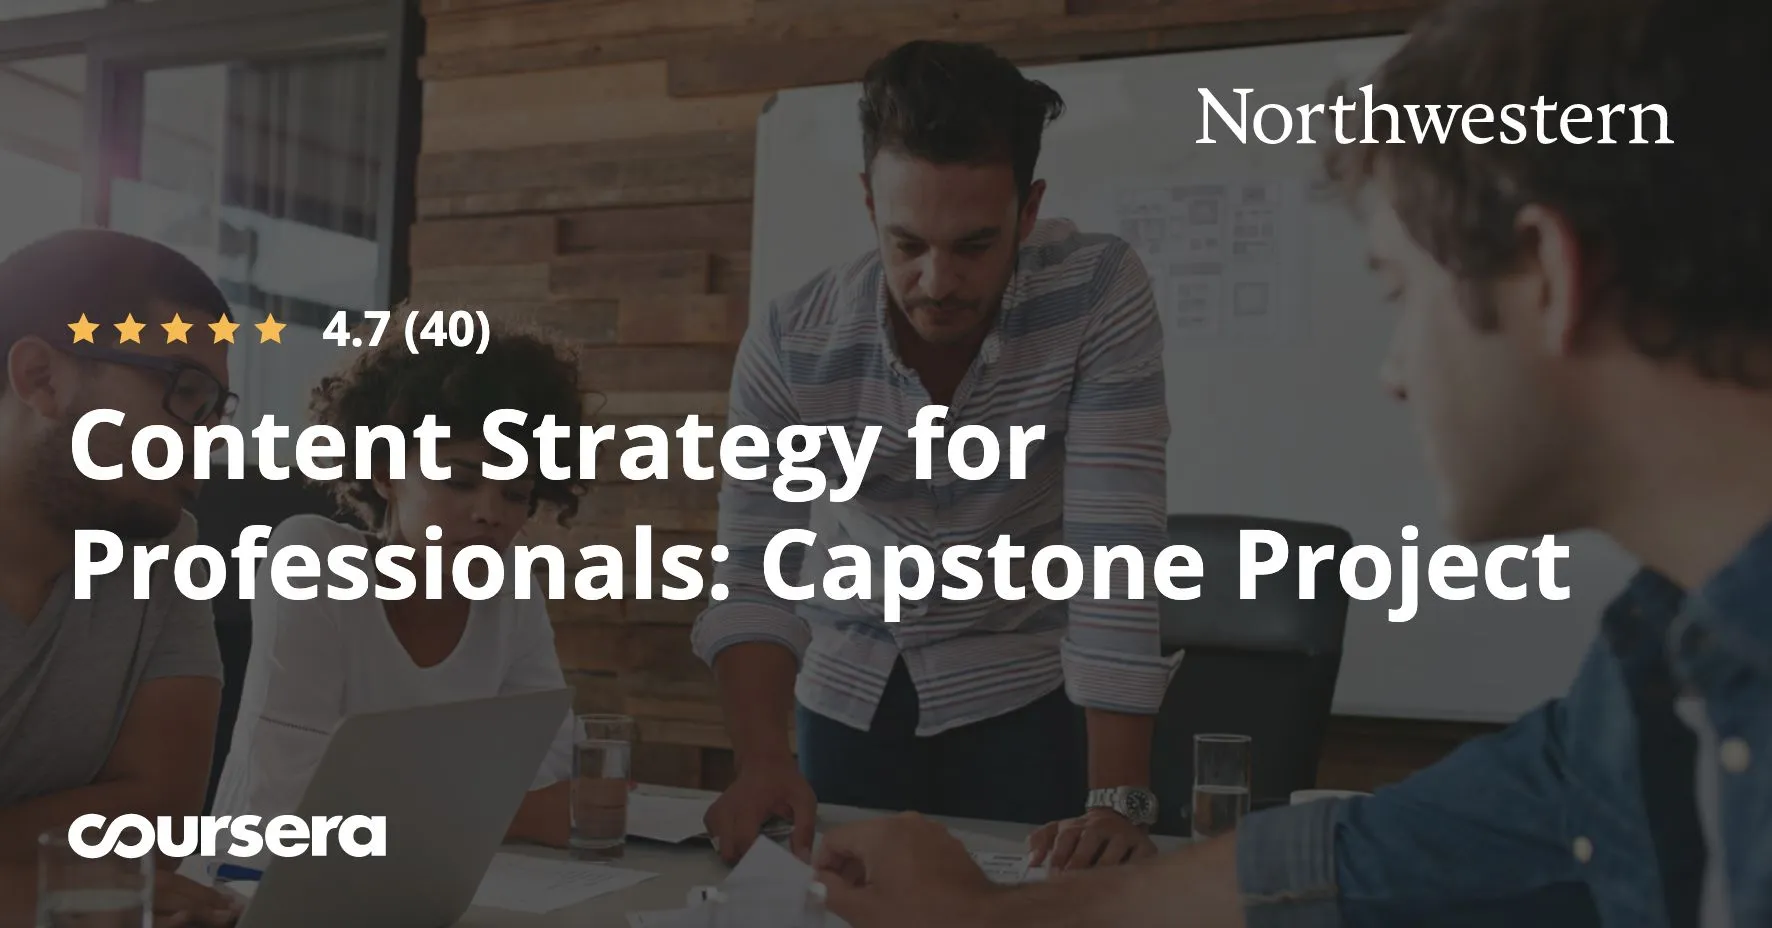 Content Strategy for Professionals: Capstone Project